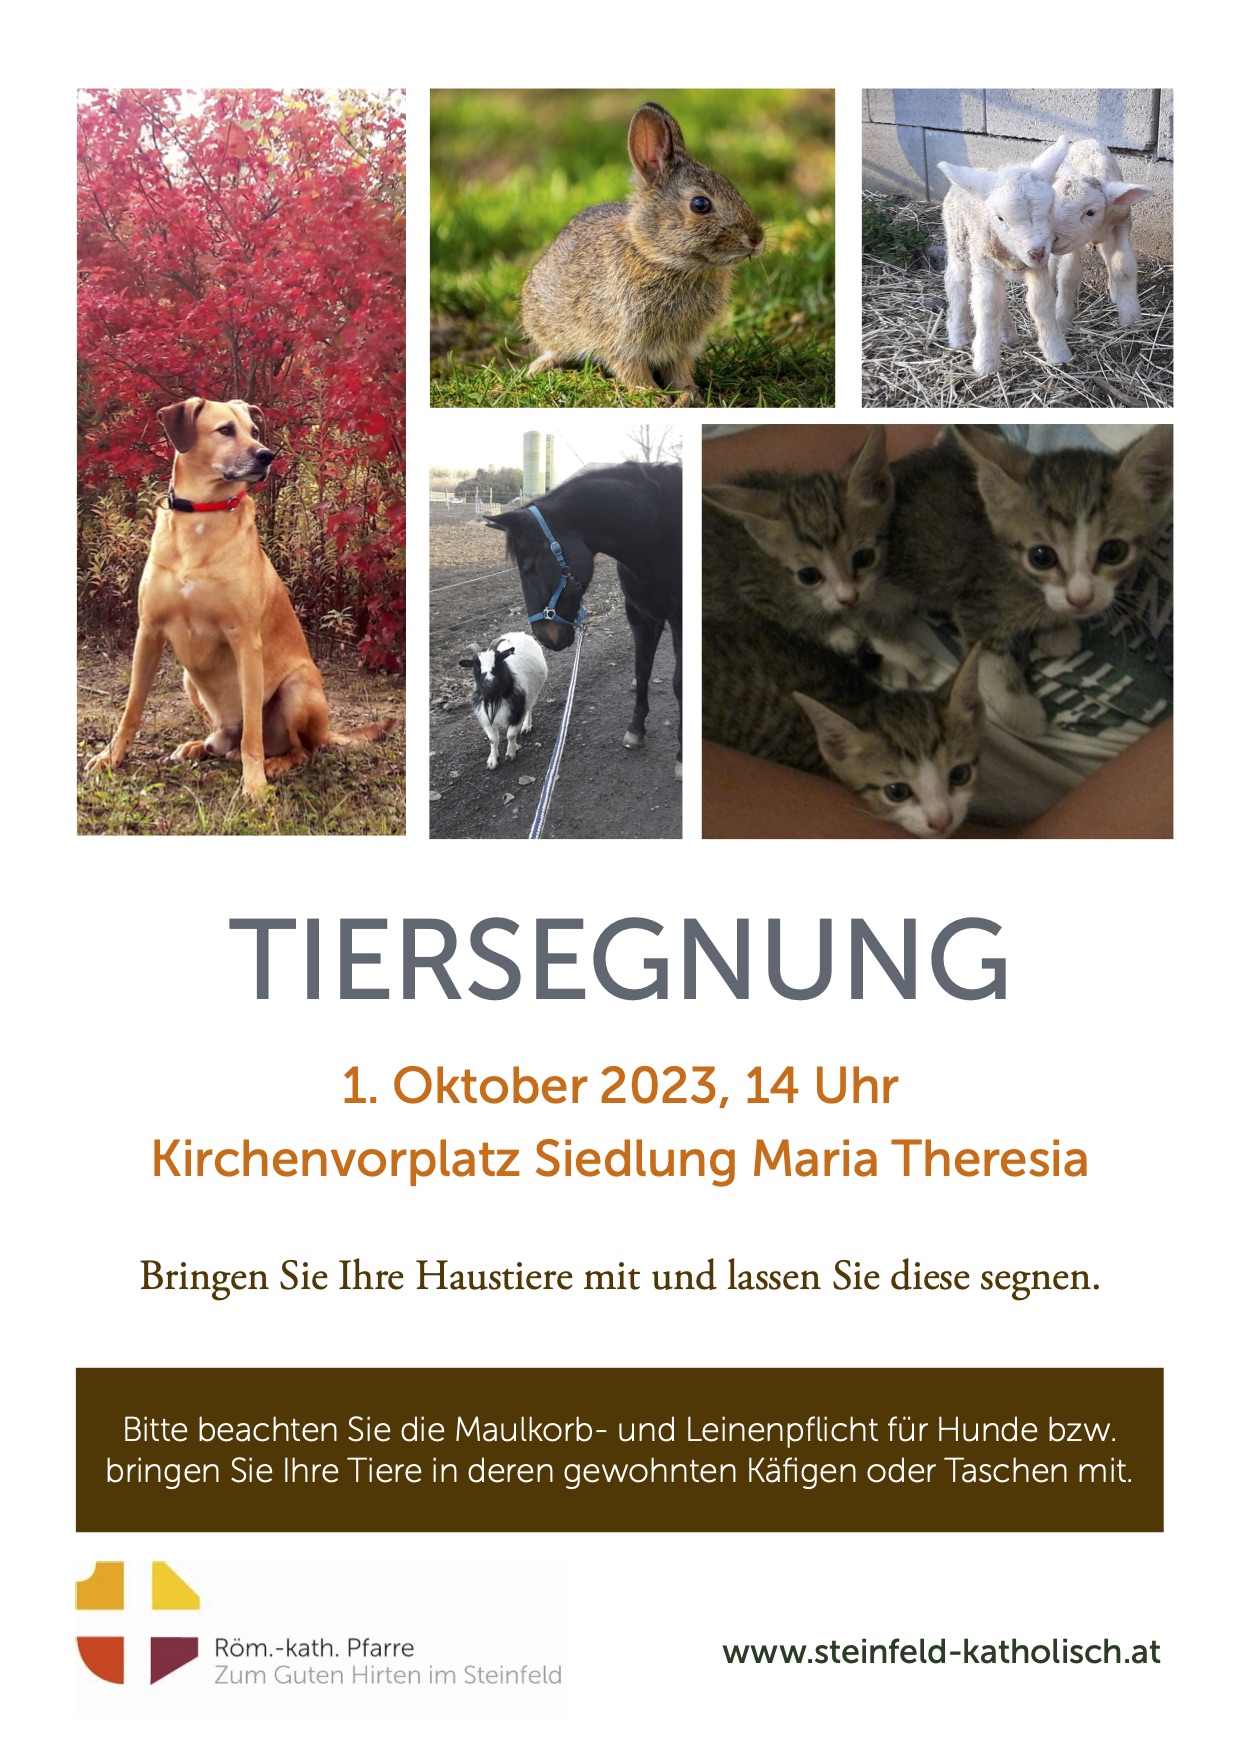 Tiersegnung 2023